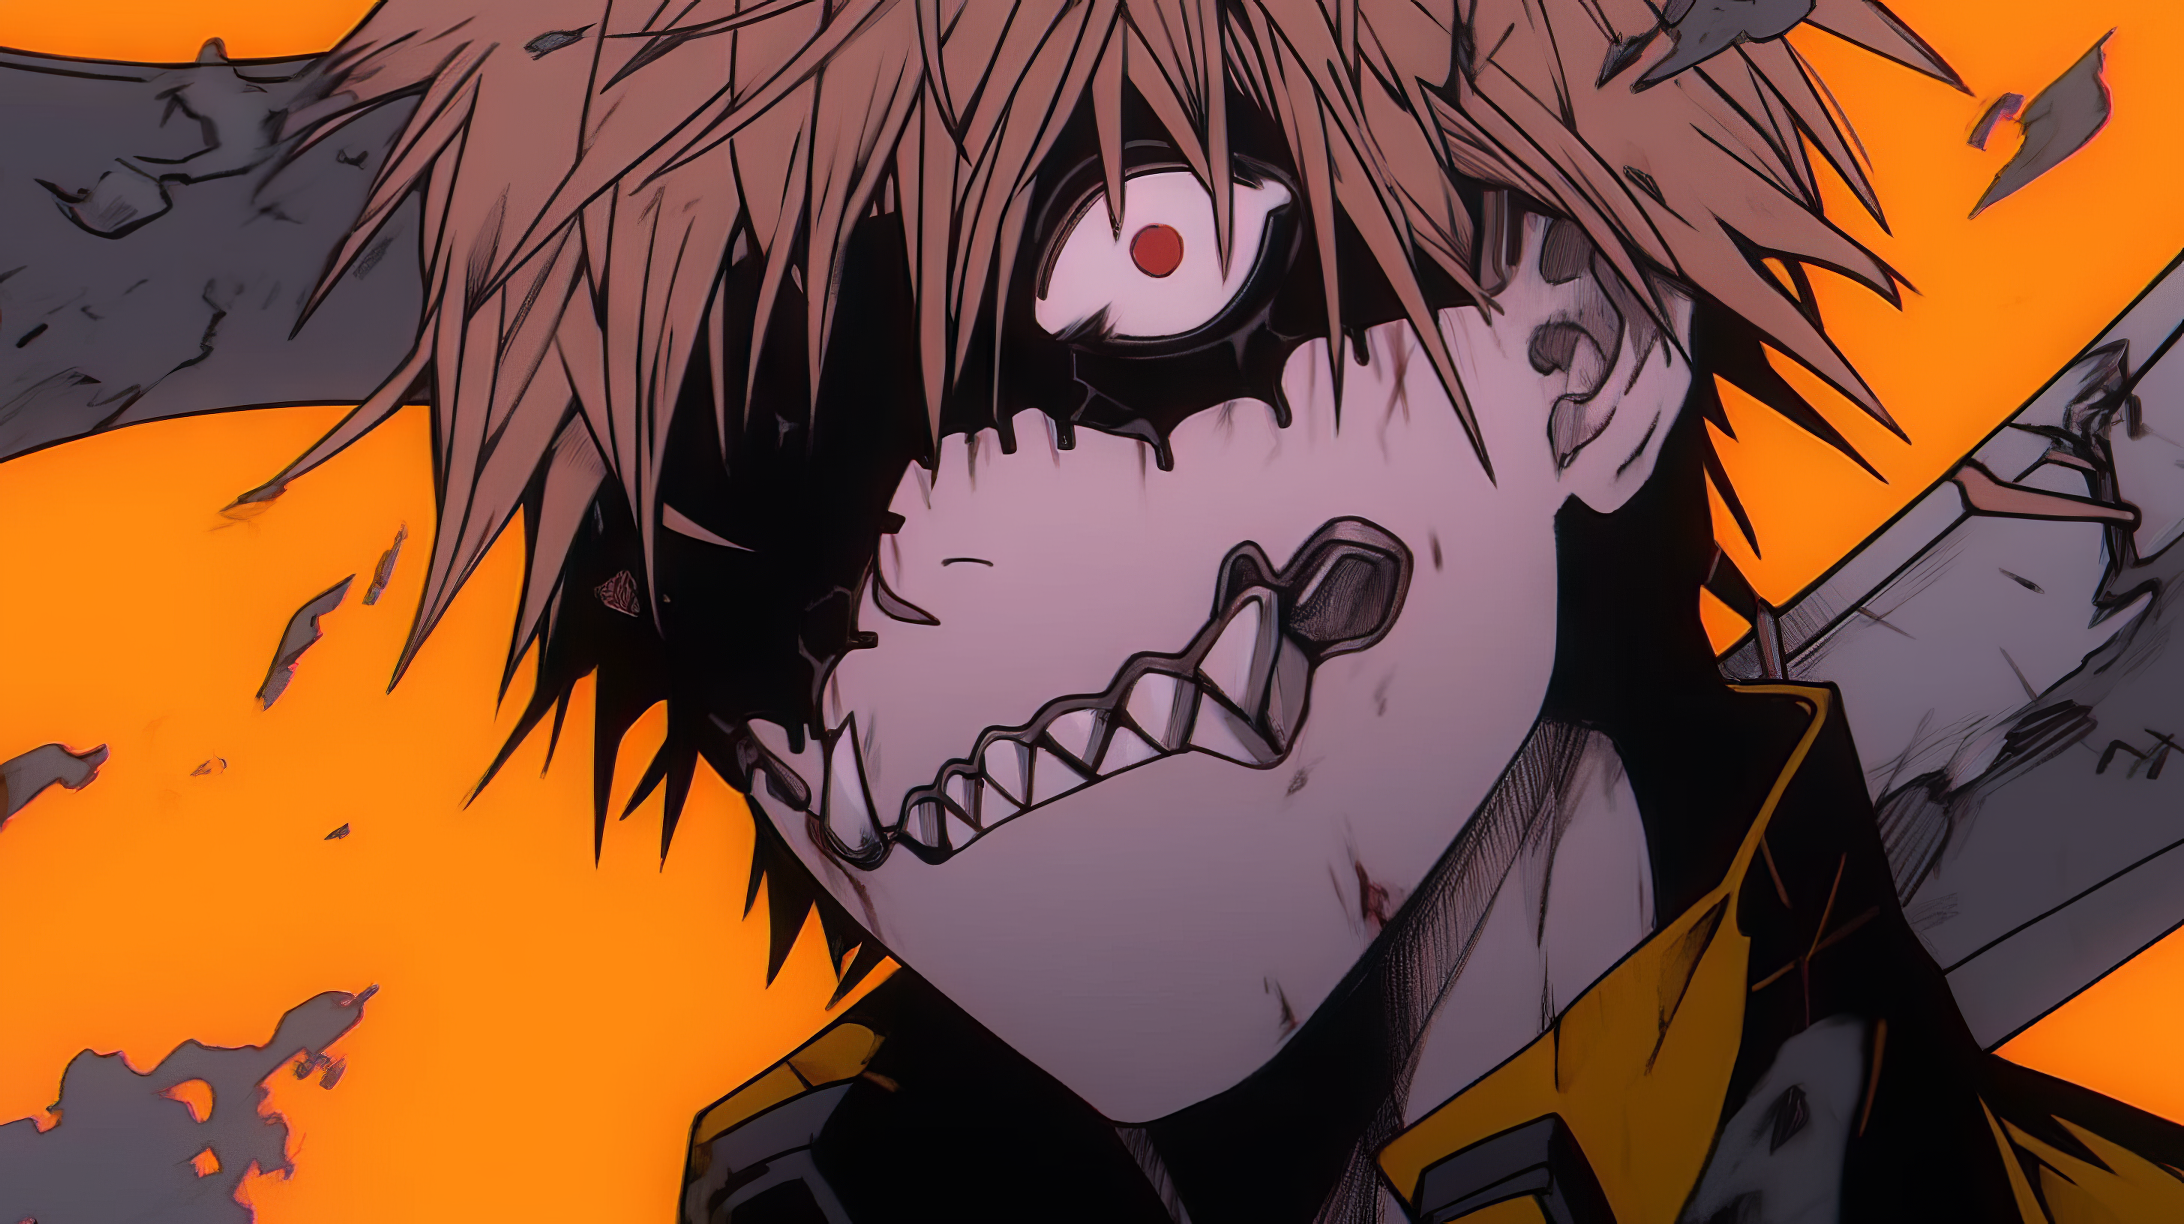 Chainsaw Man PC Wallpapers - Wallpaper Cave